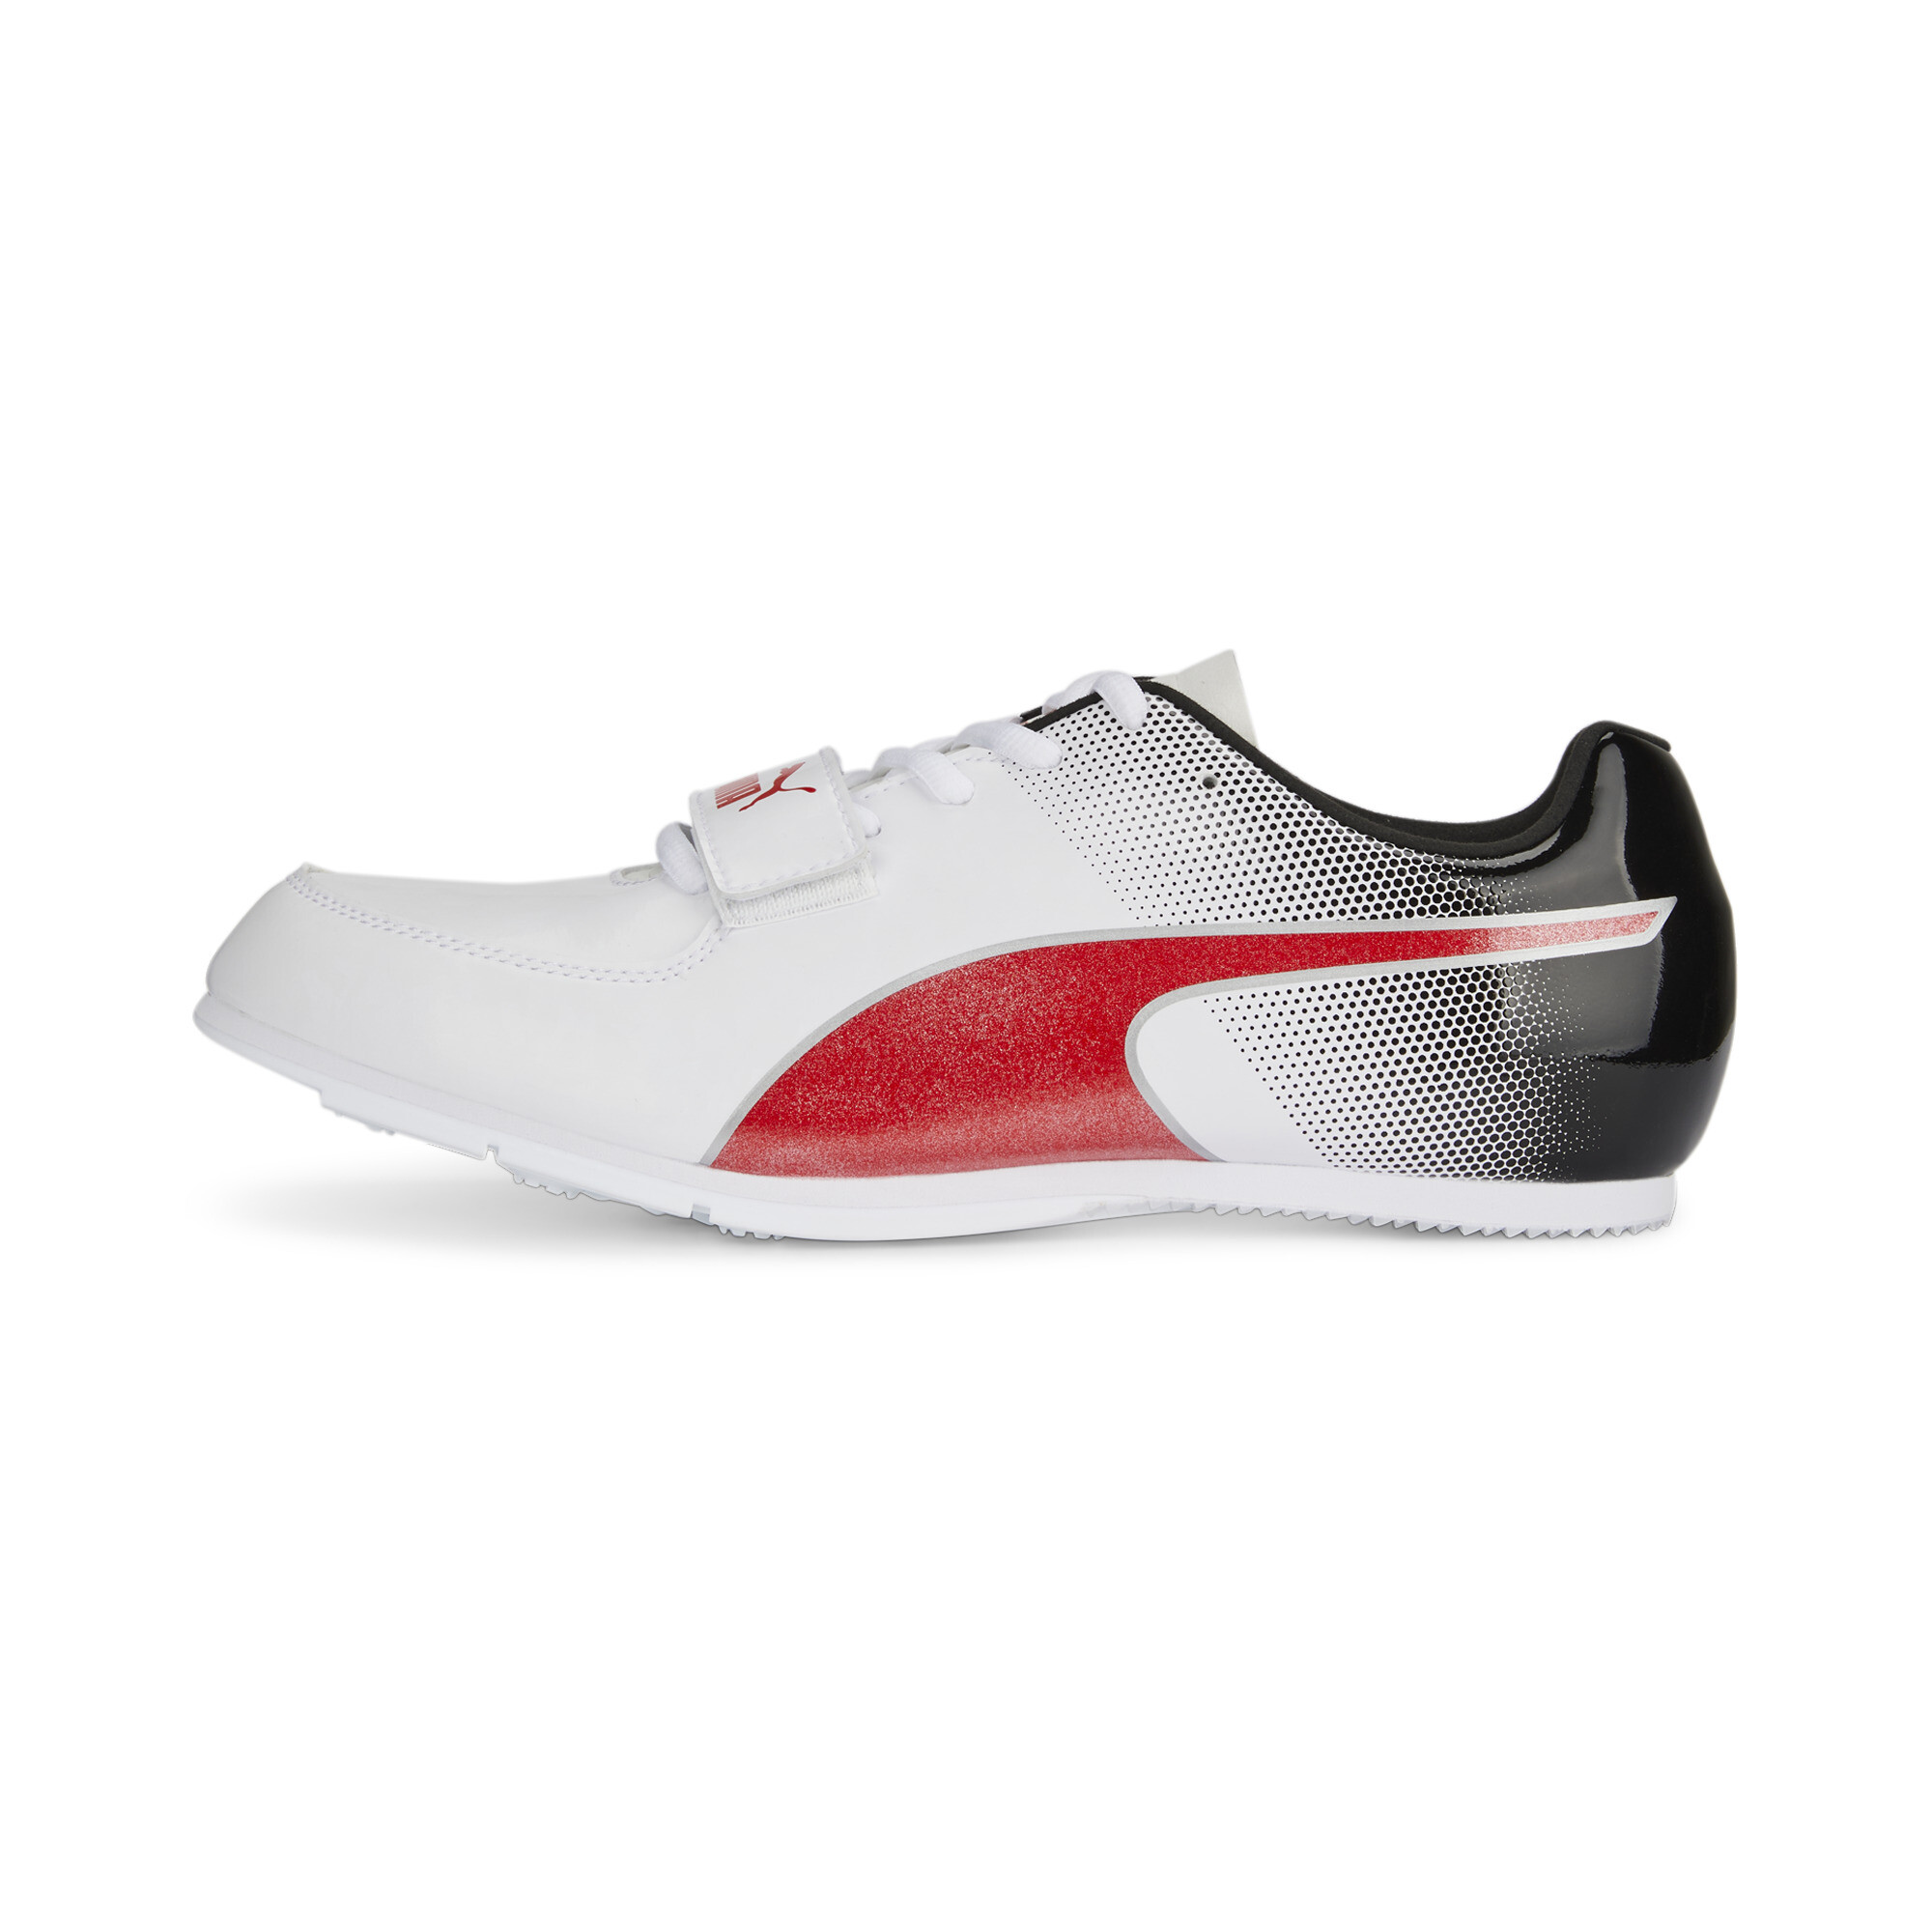 Puma Evo SPEED Long Jump 10 Track And Field Shoes, White, Size 40.5, Shoes